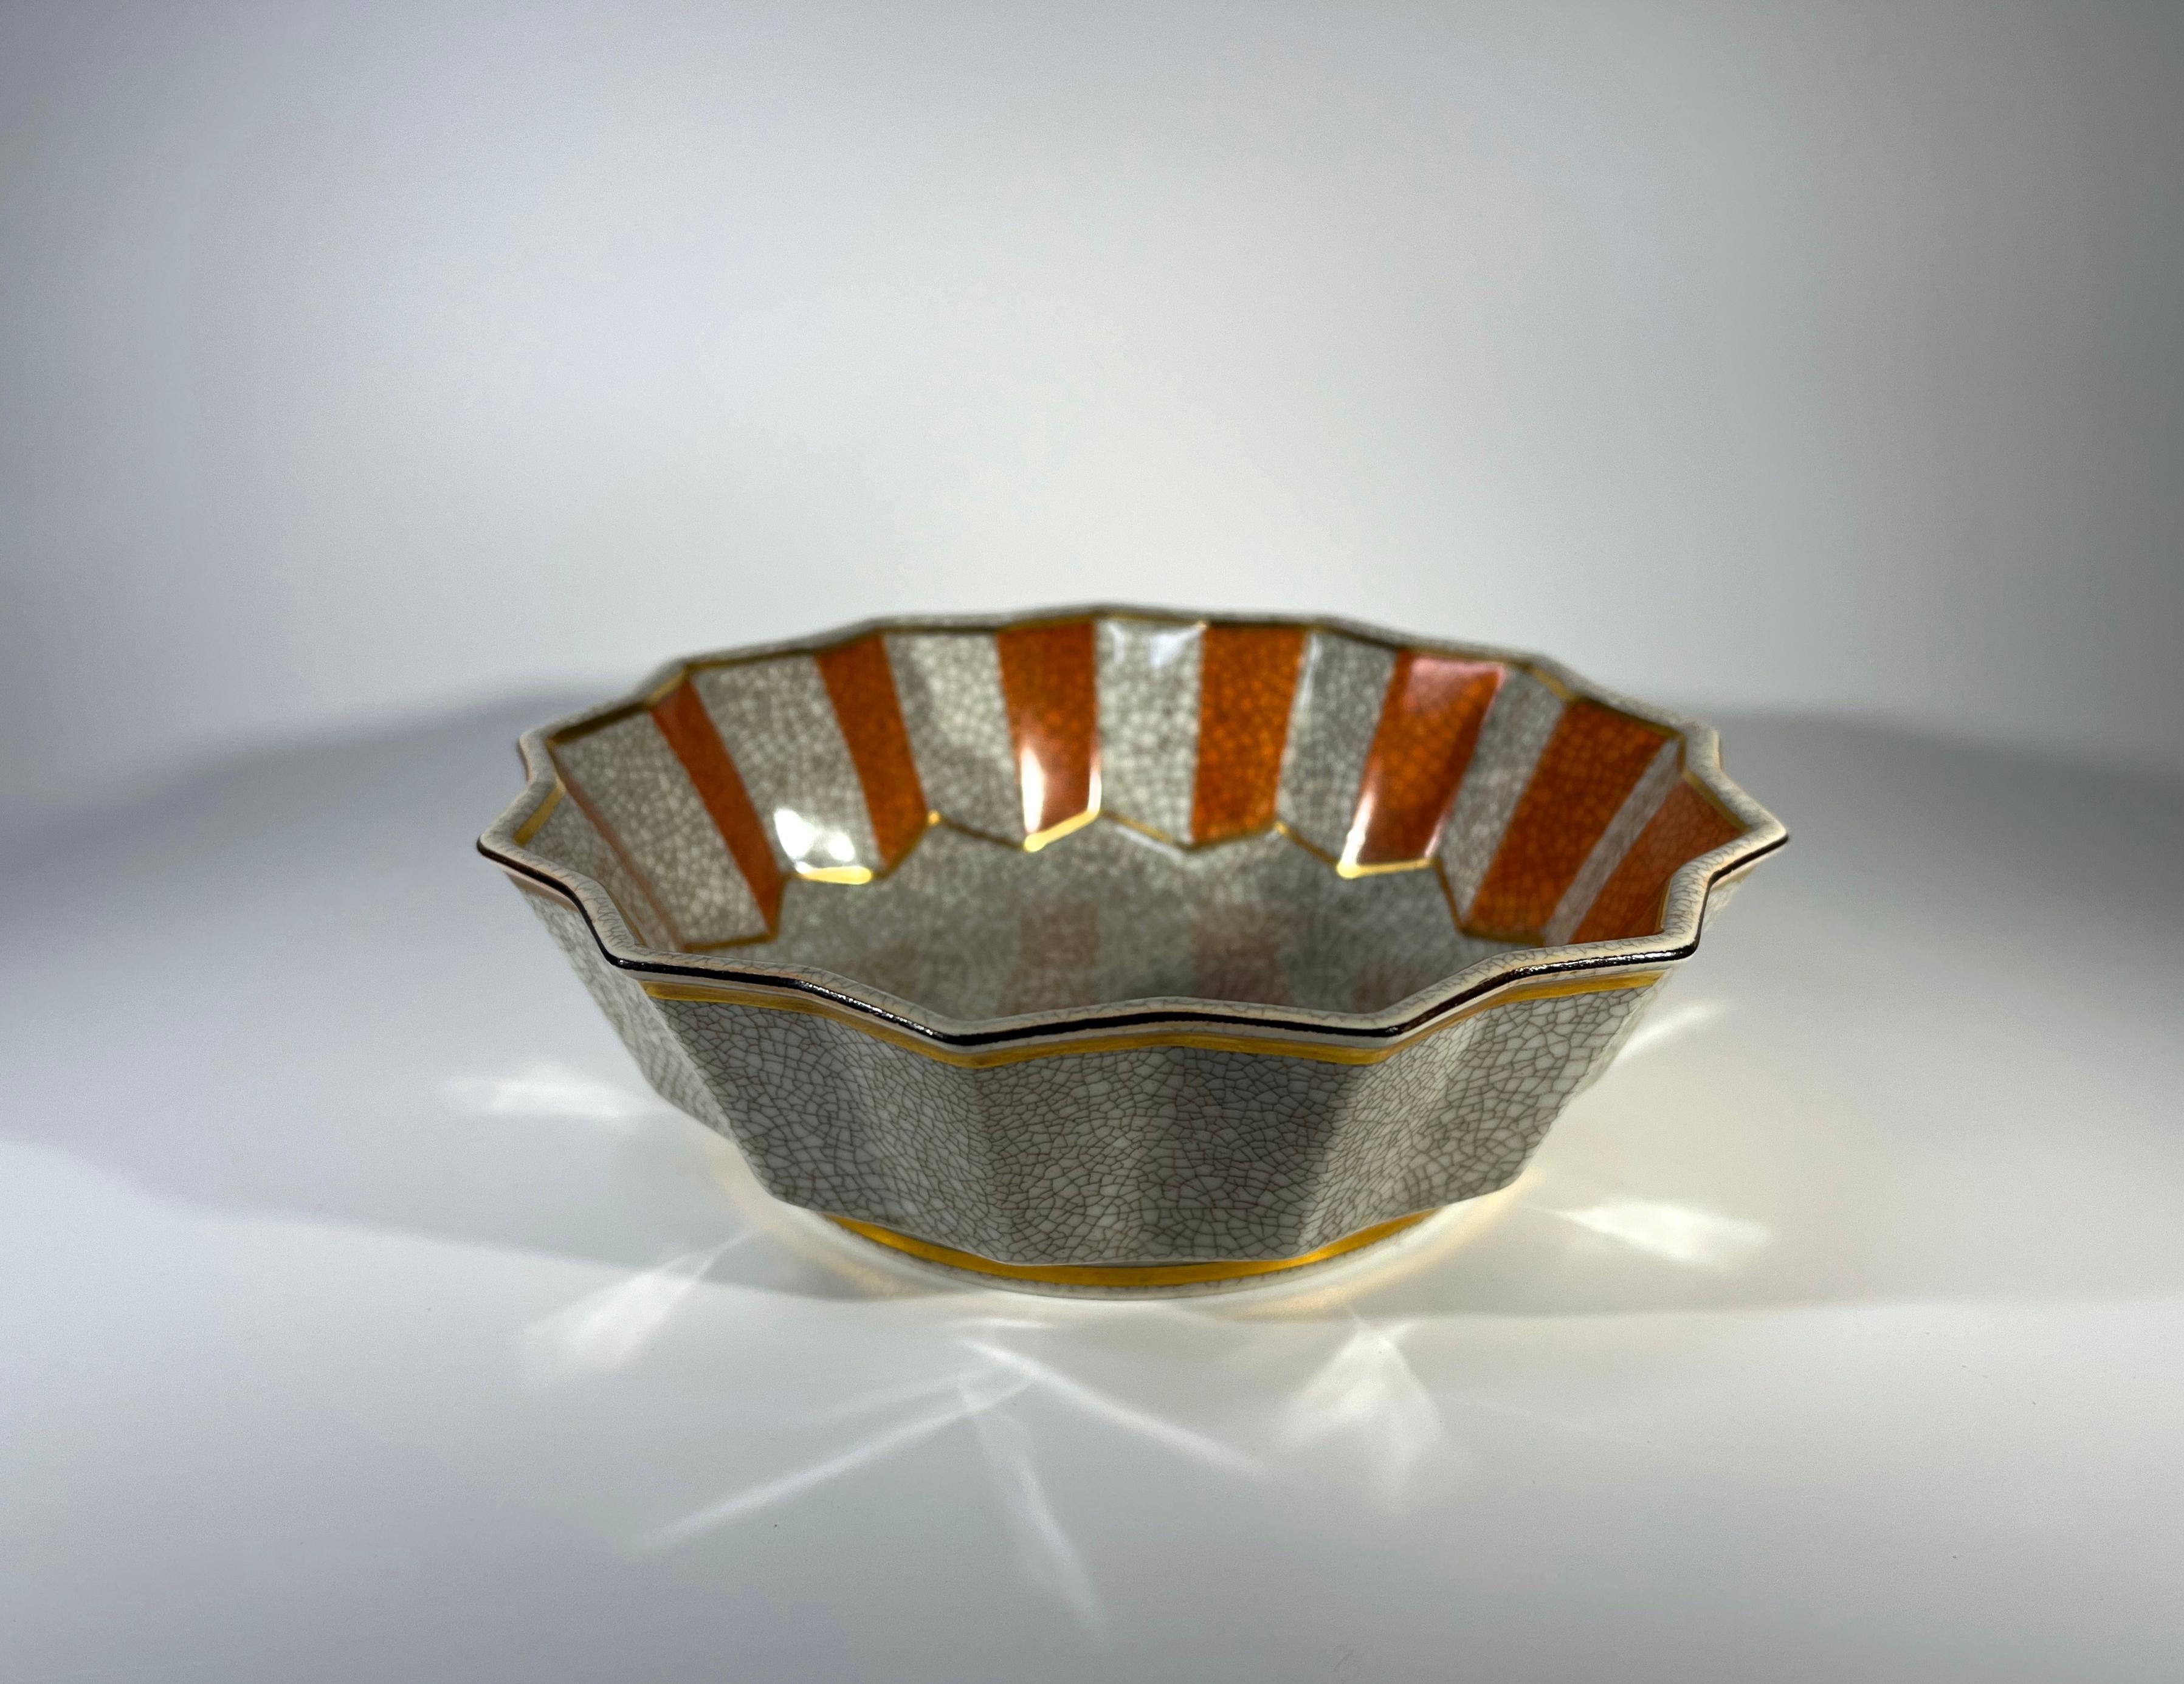 Royal Copenhagen porcelain terracotta and grey crackle glazed fluted dish designed by Thorkild Olsen
Superb gilded banding highlights Art Deco influence
Circa 1953
Stamped and numbered 3191
Height 2 inch, Diameter 6 inch
Excellent condition
Wear